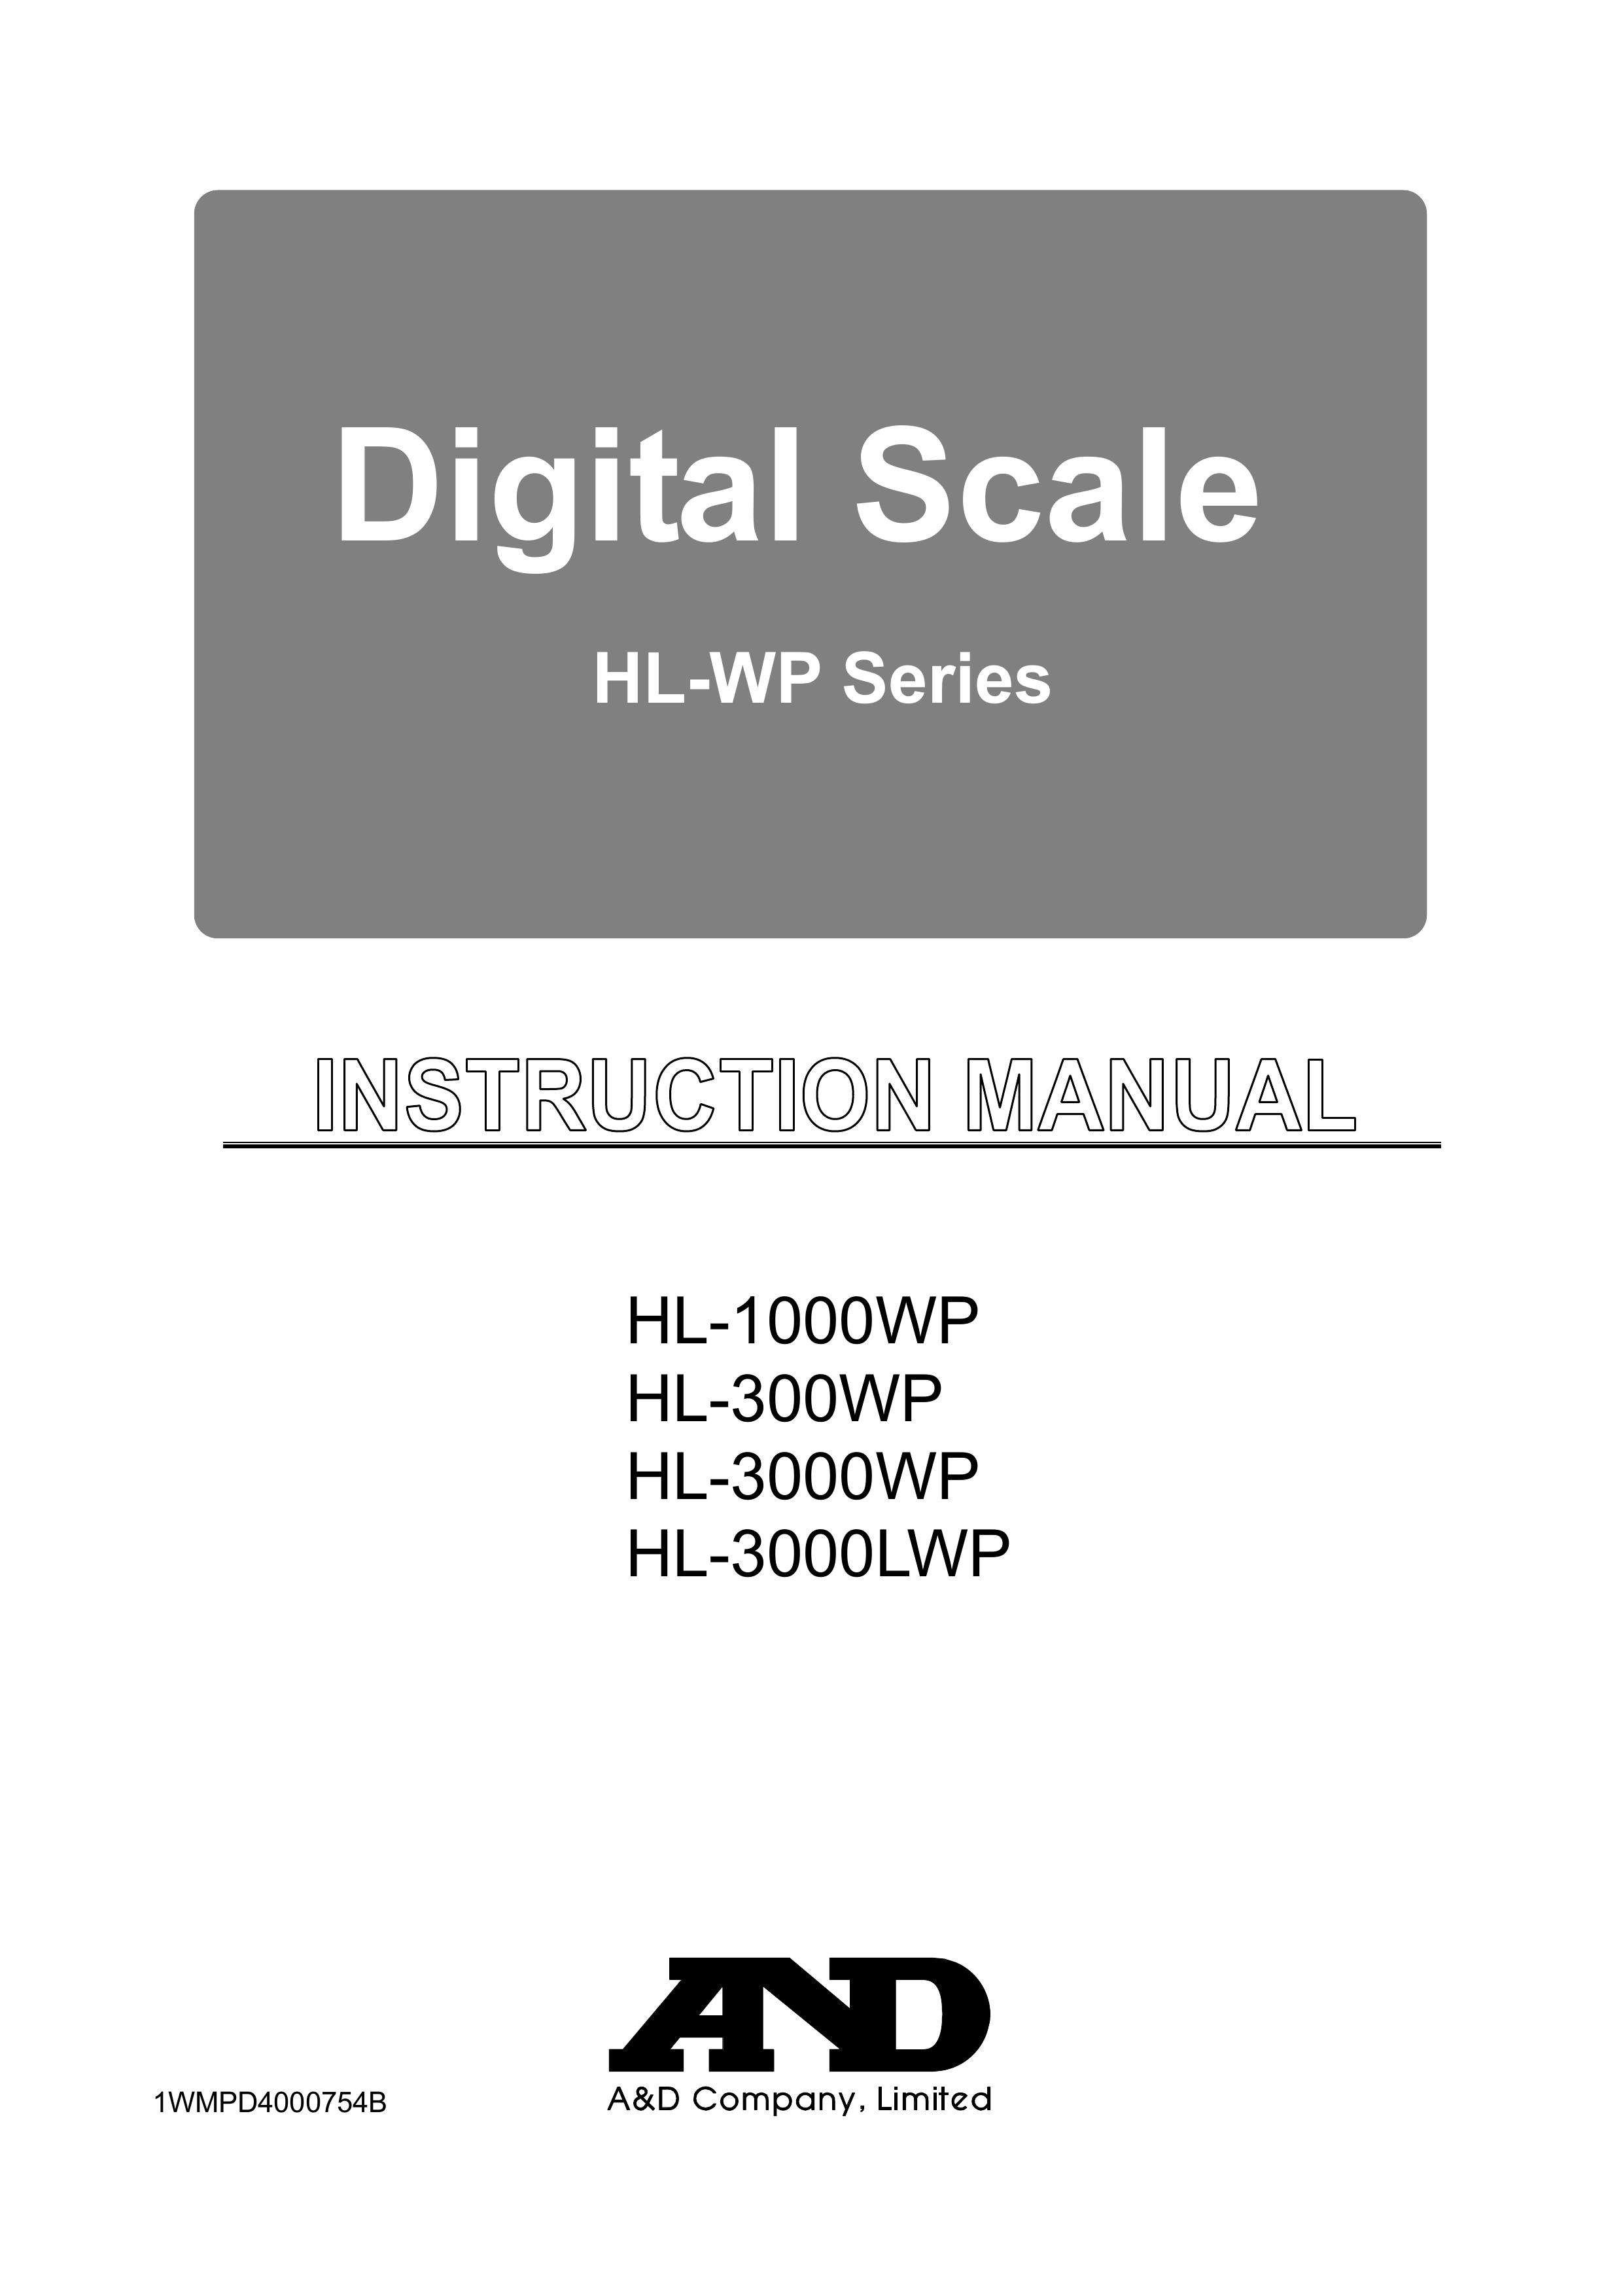 A&D HL-1000WP Scale User Manual